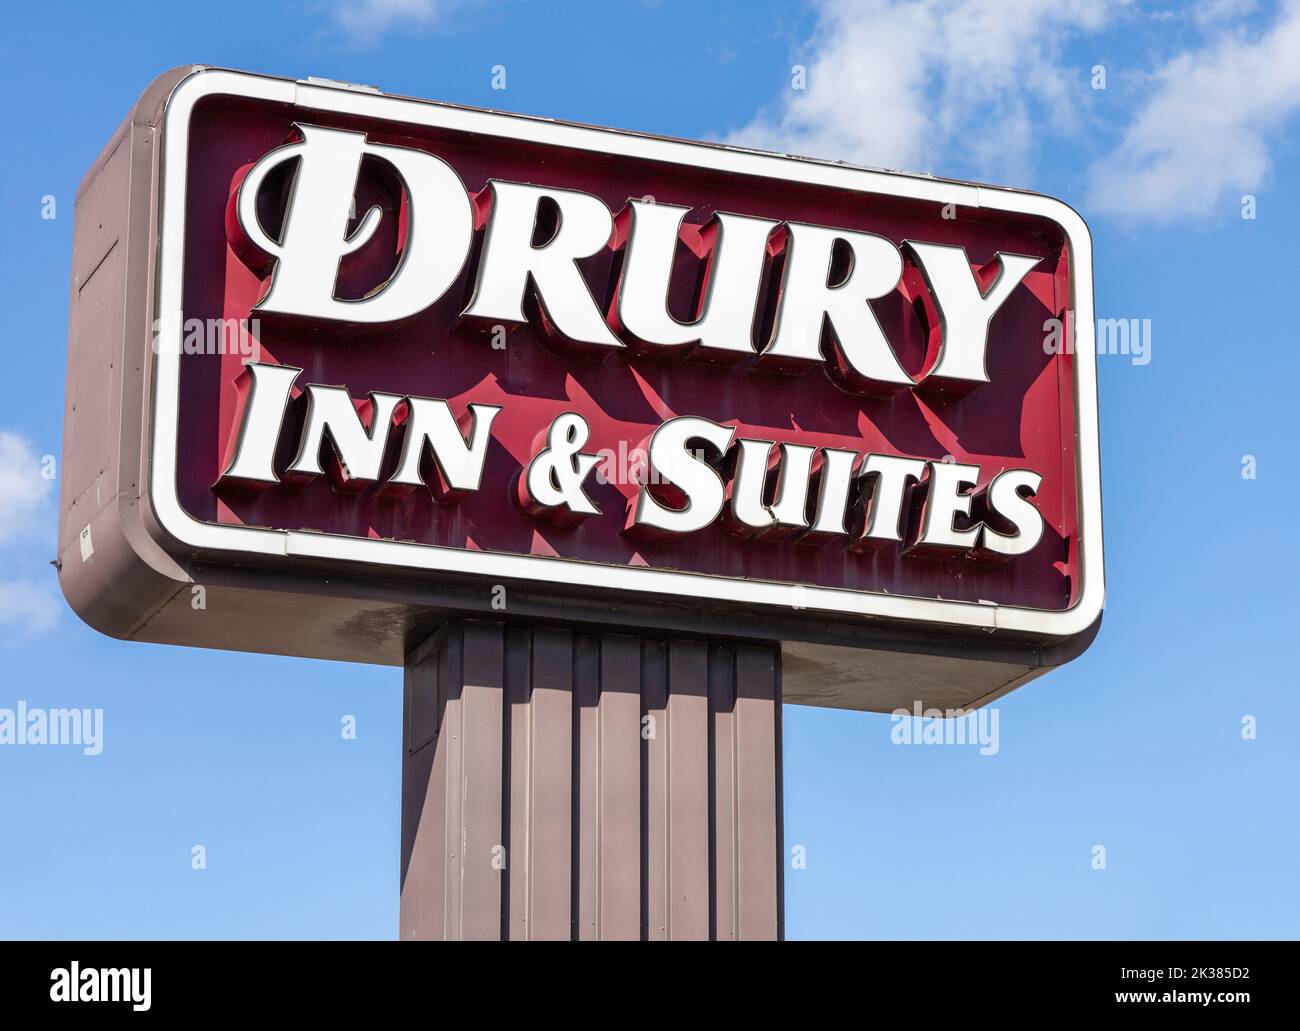 Drury Inn And Suites Hotel Sign Outside The Hotel In Frankenmuth Michigan, Drury Inn & Suites Logo Sign Stock Photo